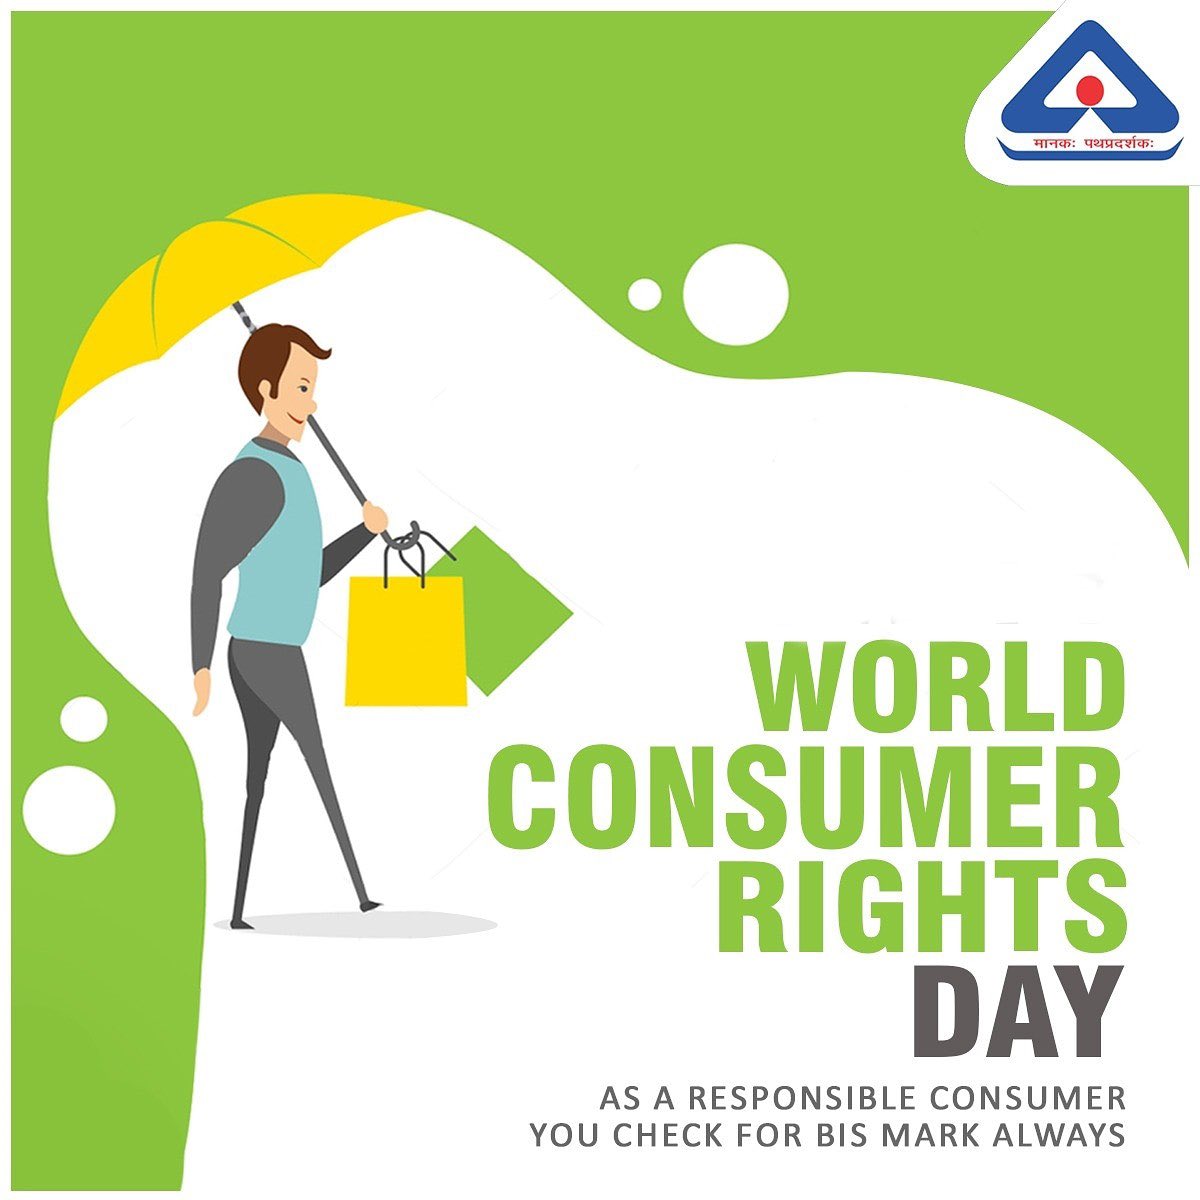 #WorldConsumerRightsDay is celebrated every year on 15th March as a means of raising global awareness about consumer rights and needs. #ISIMarkAlways #BISAlways